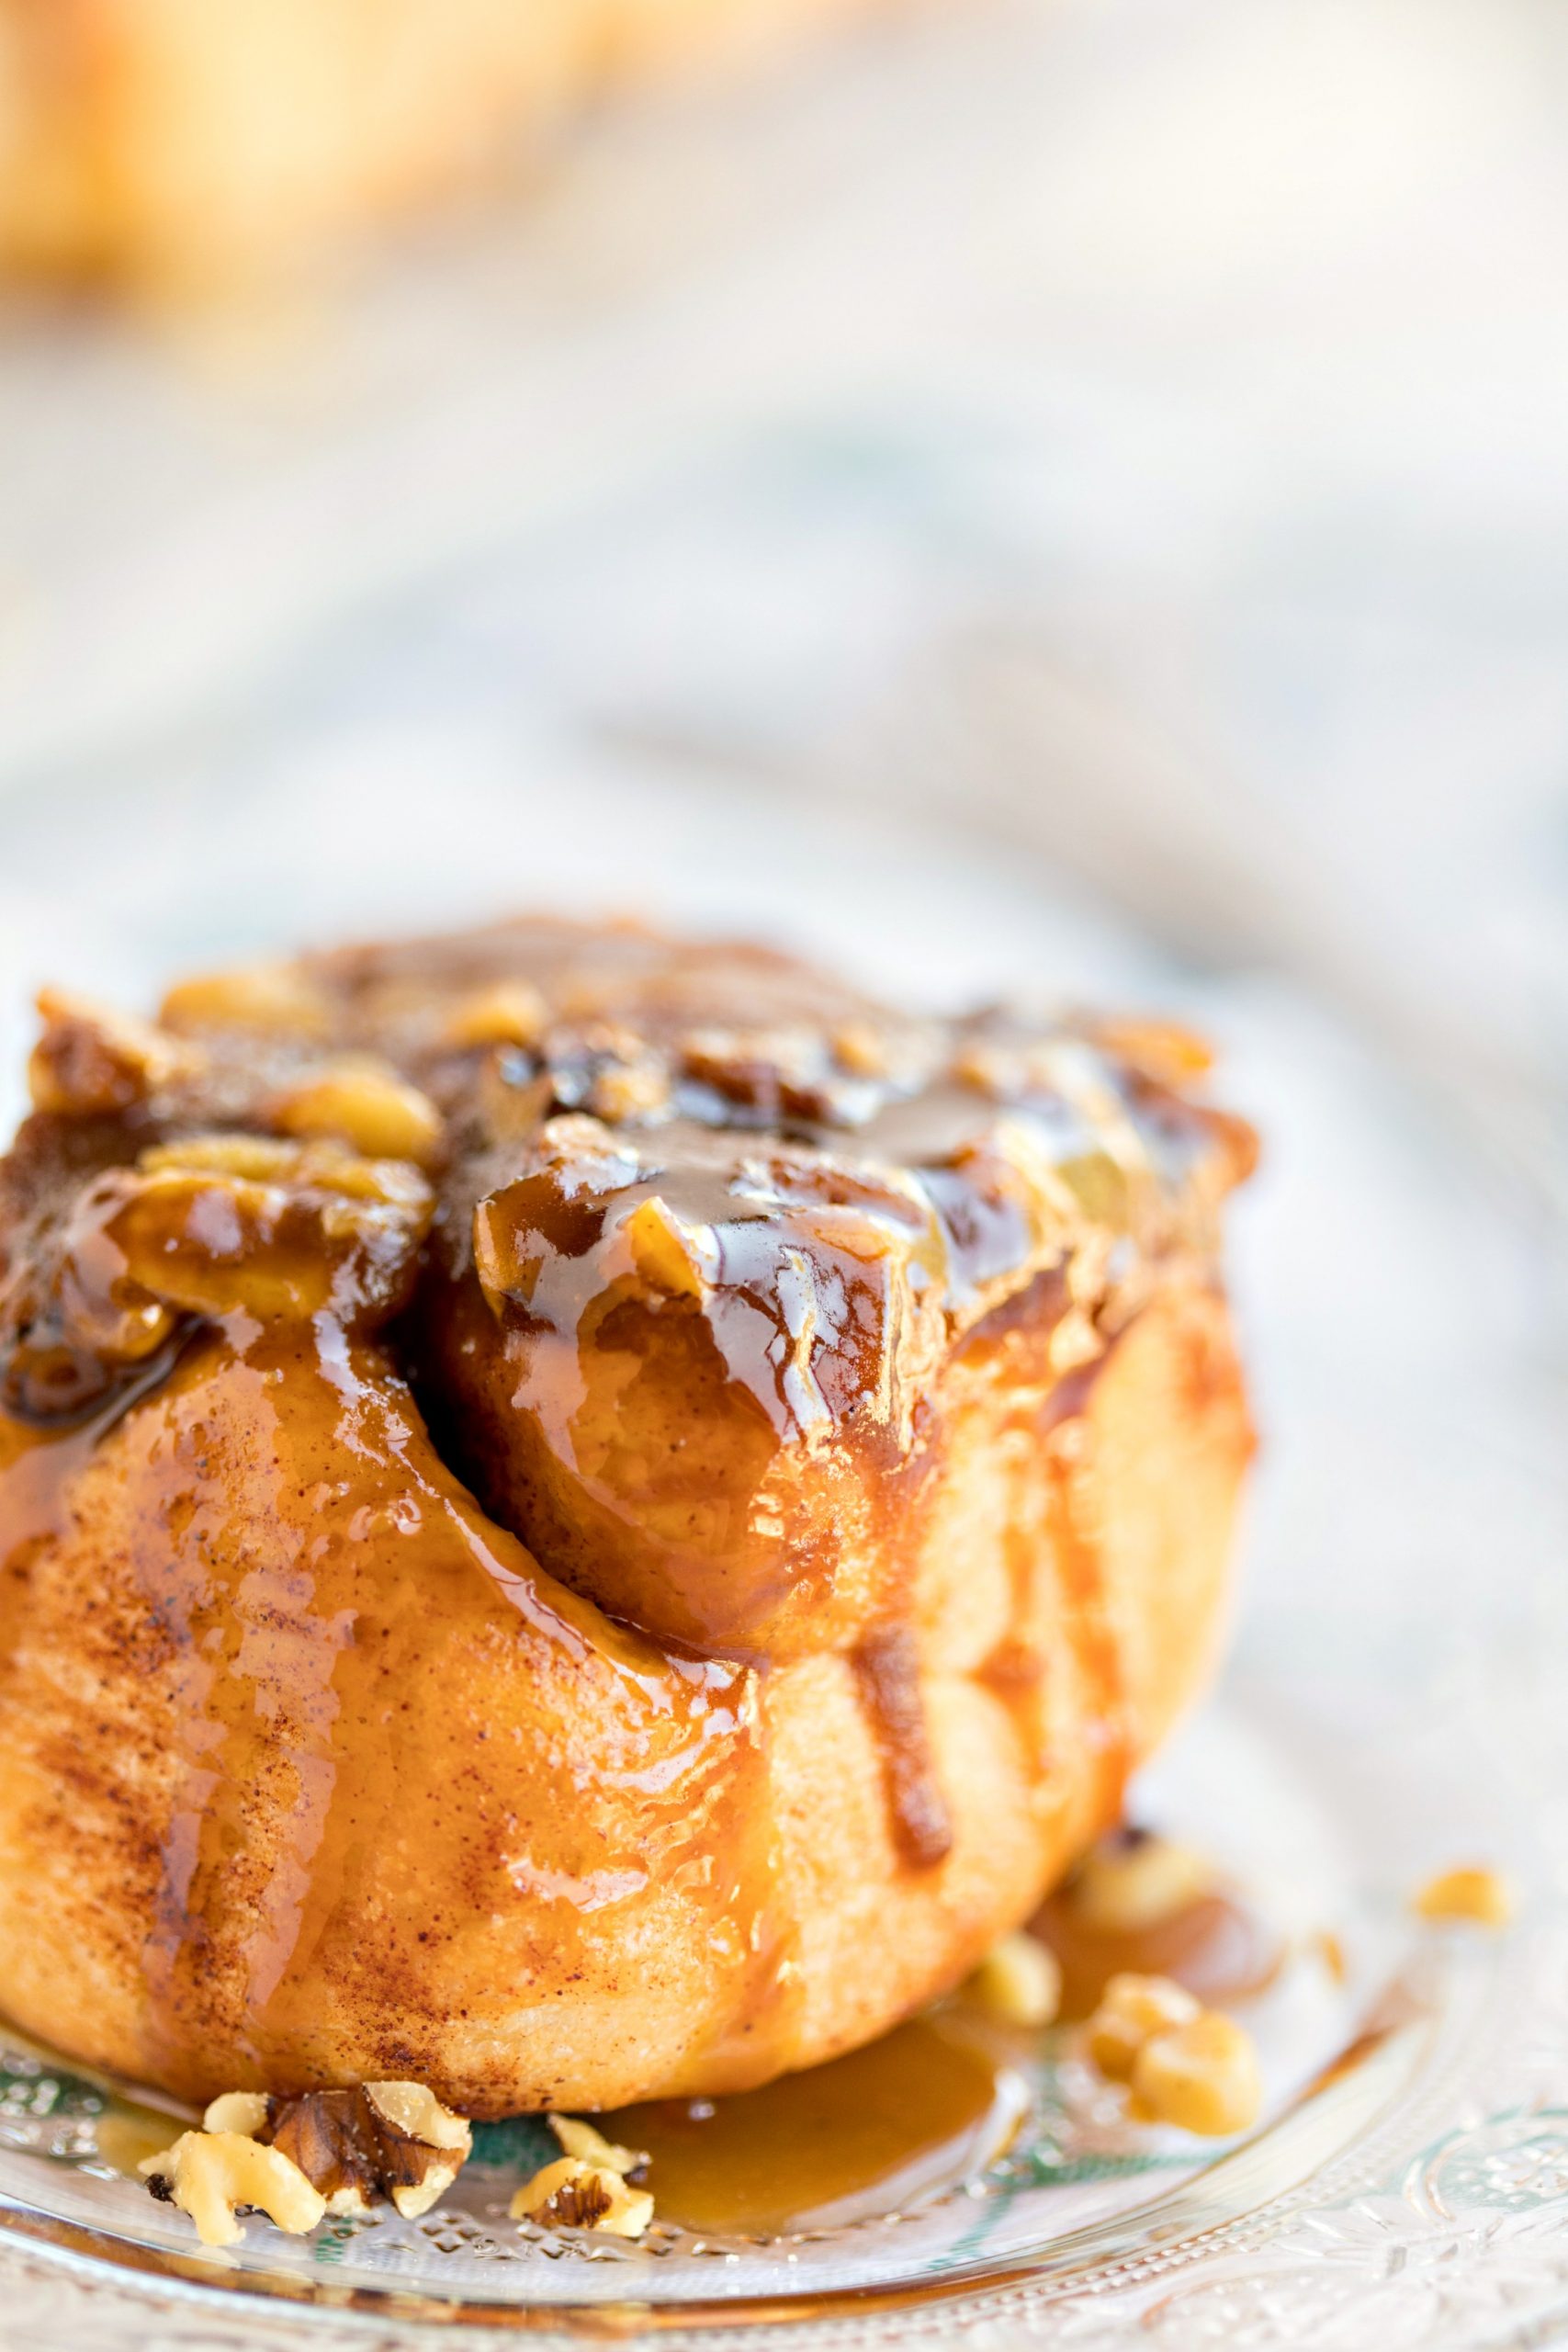 A delicious sticky bun dripping with caramel and topped with pecans